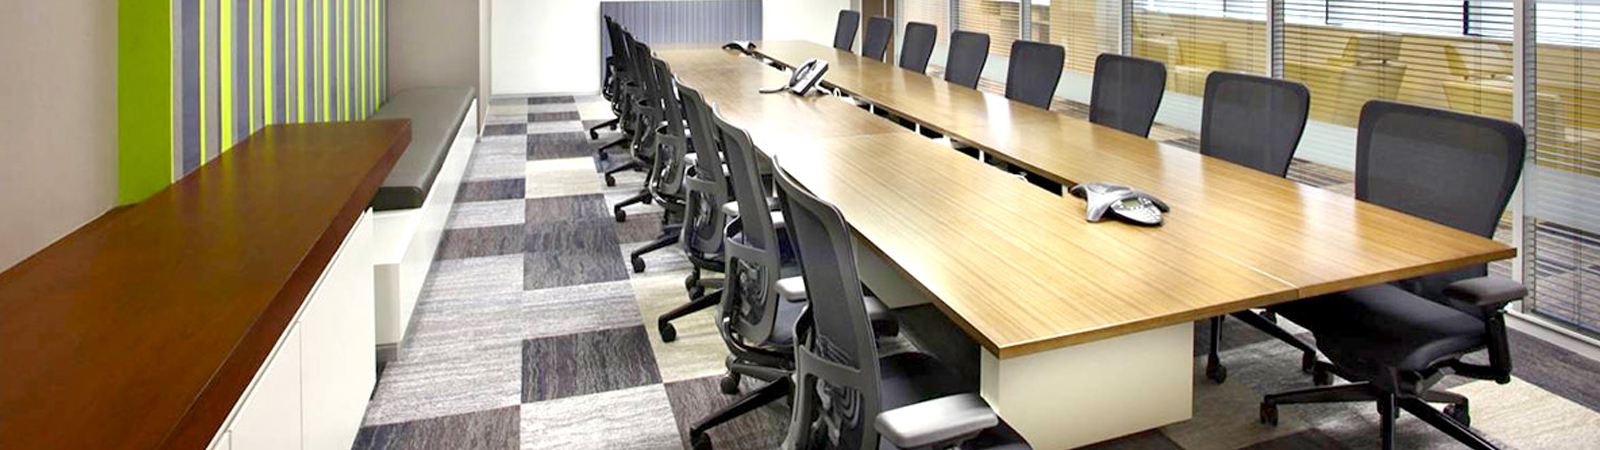 Student Chairs in Delhi NCR, India